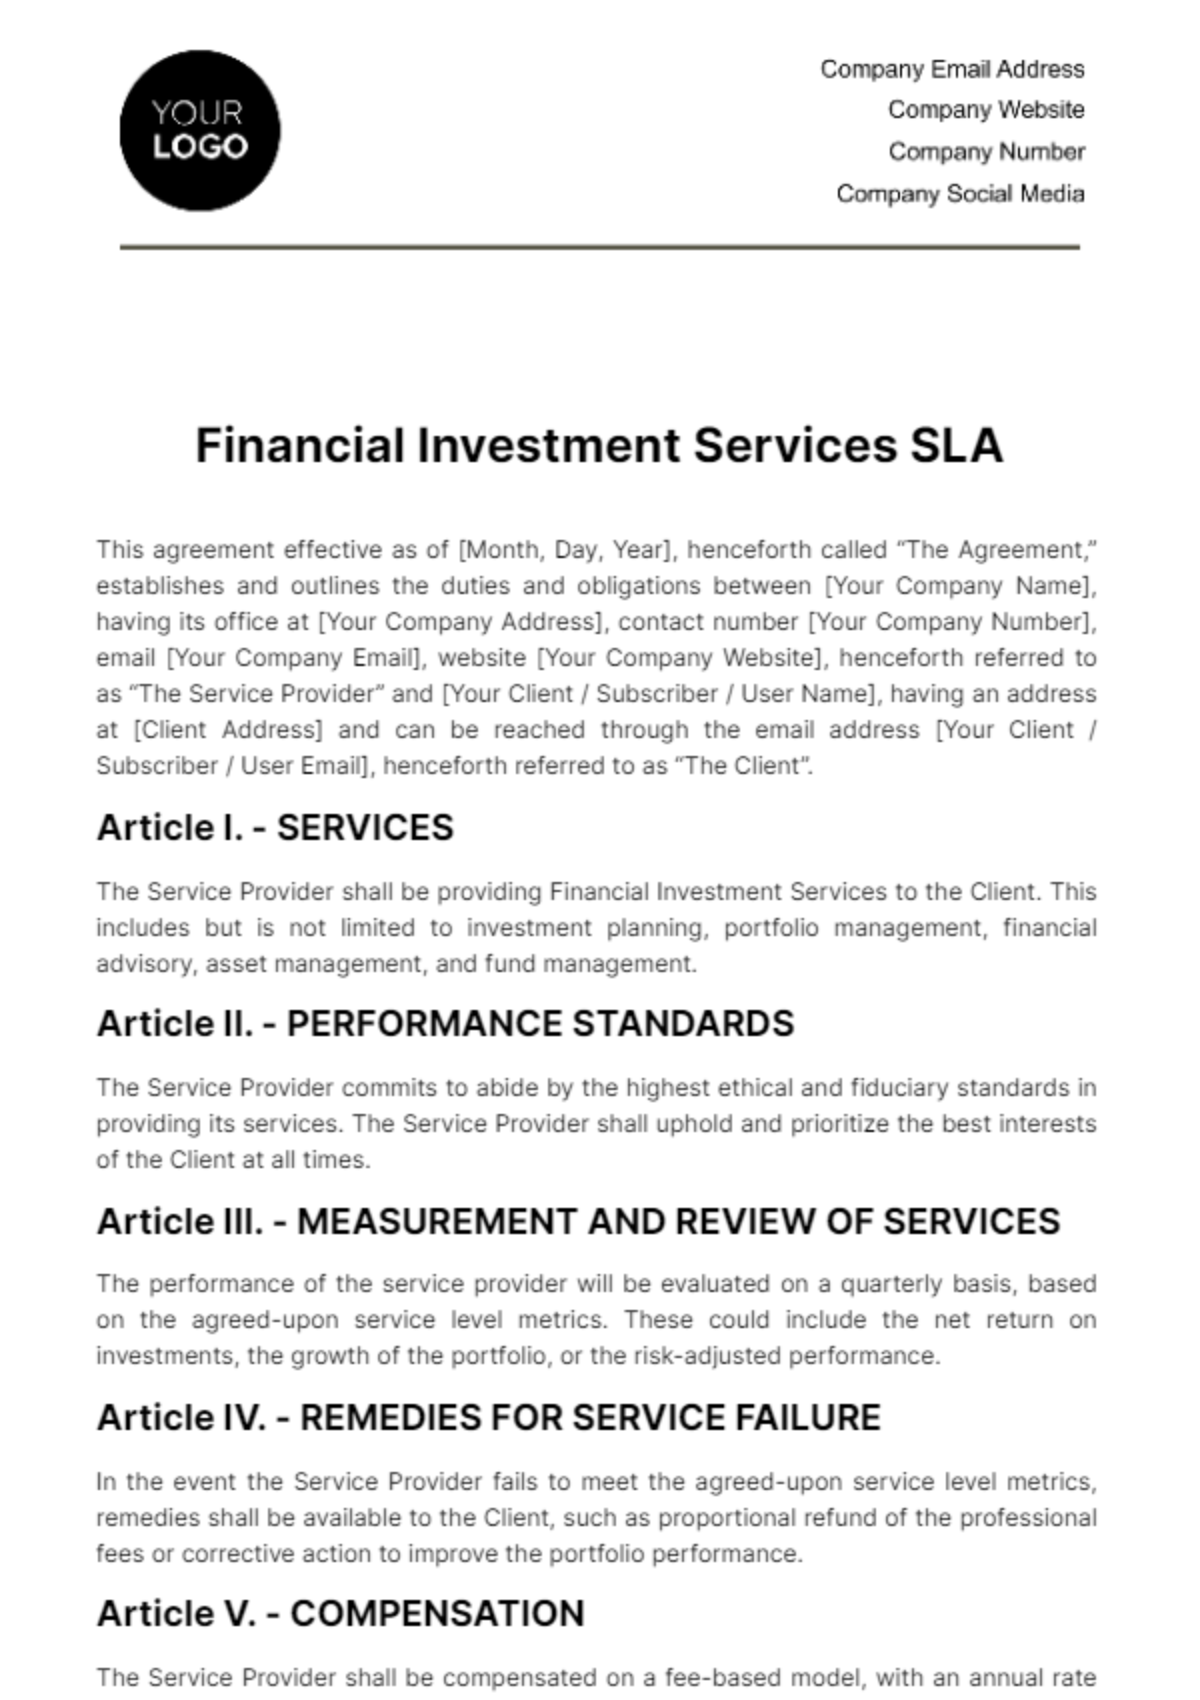 Financial Investment Services SLA Template